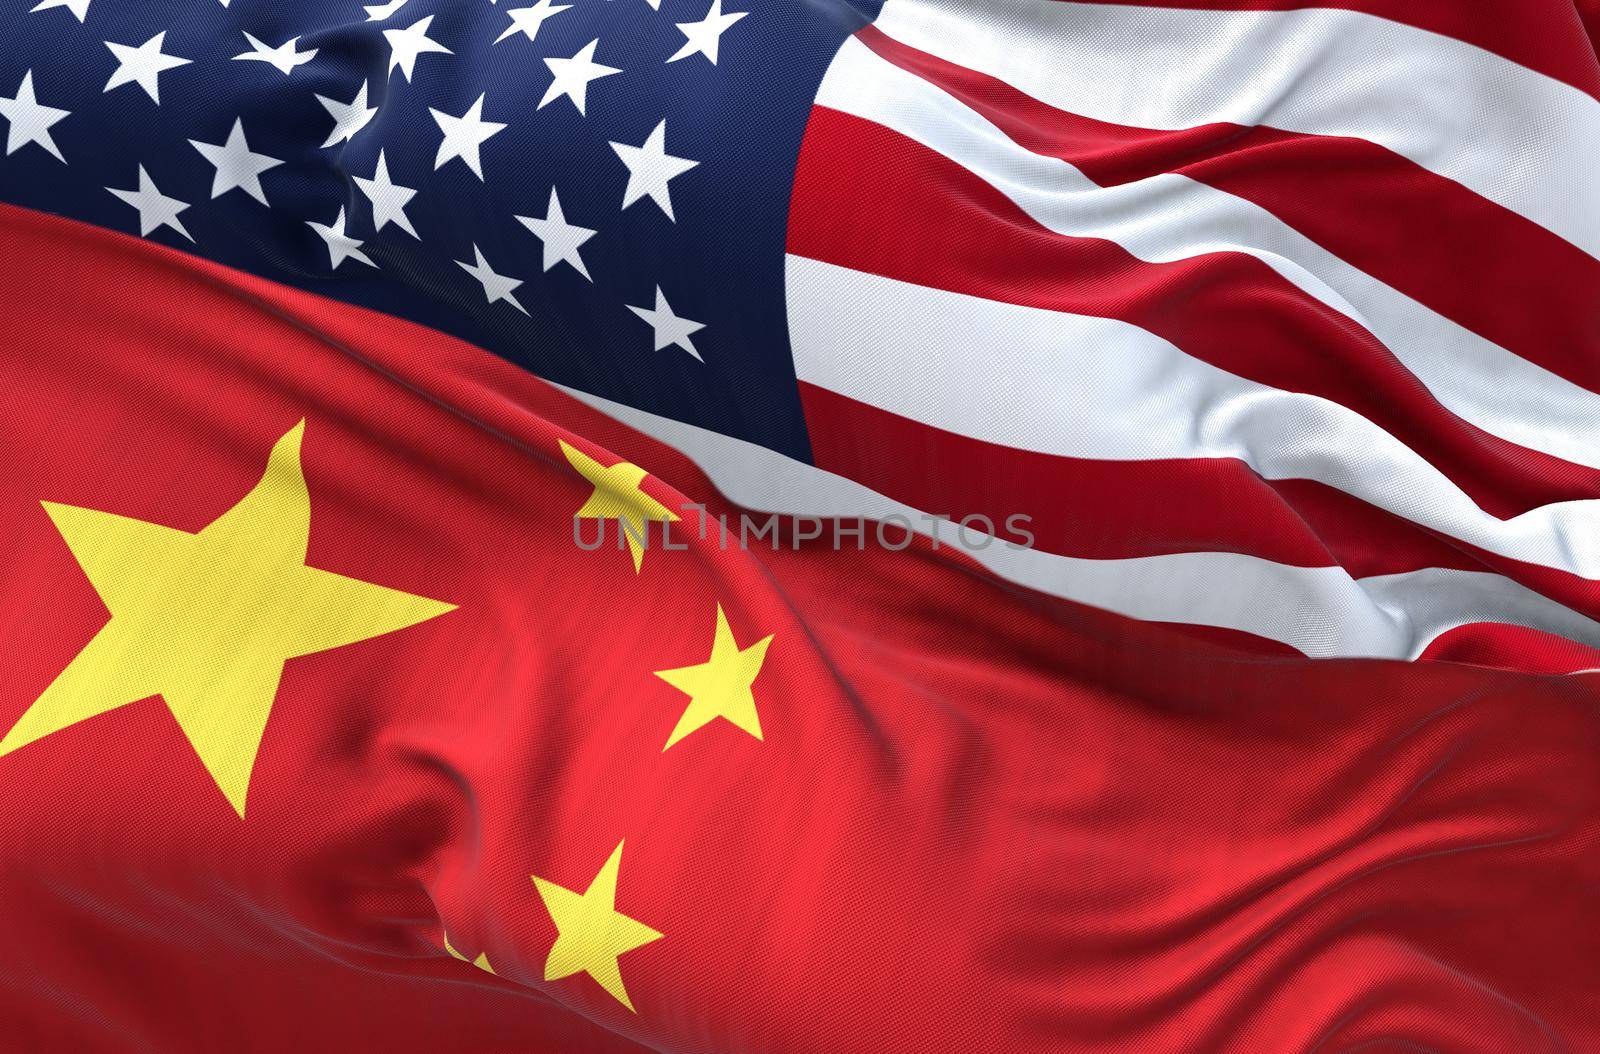 The flags of China and the United States of America waving. International relations and diplomacy.